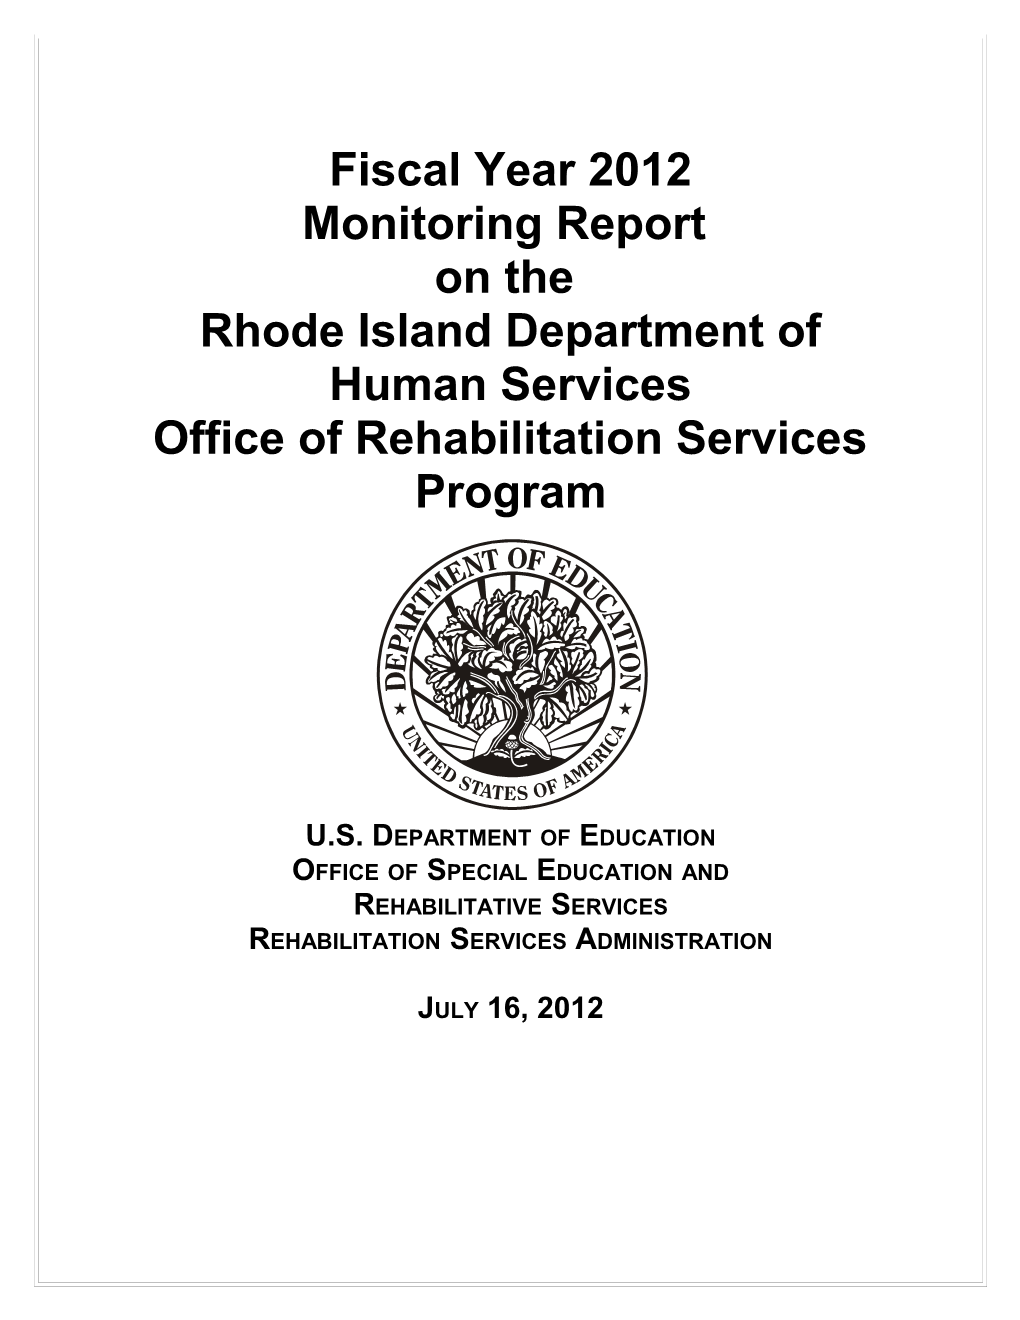 Fiscal Year 2012 Monitoring Report on the Rhode Island Department of Human Services Office